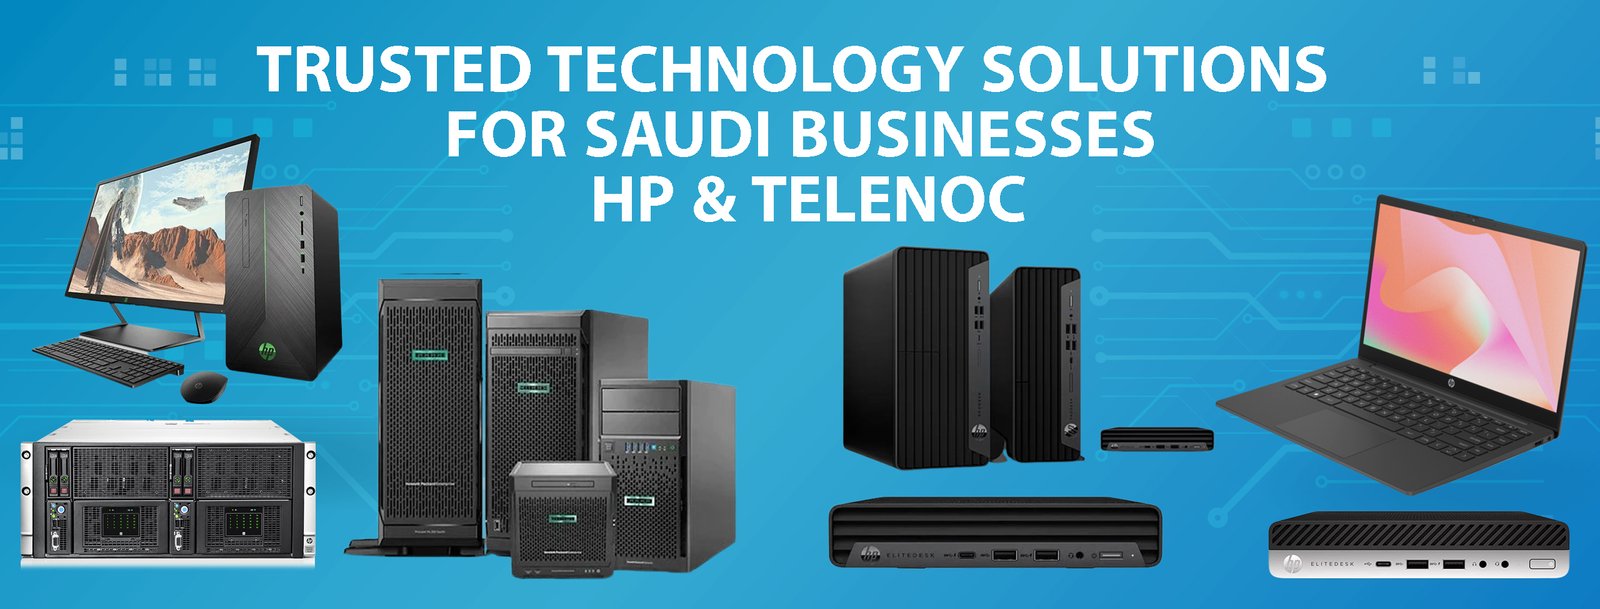 Telenoc is hp partner in saudi arabia providing wide range of hp solutions in Riyadh, dammam and Jeddah KSA. If you are looking for reliable hp reseller or dealer then you are at right place. We are hp distributor and offering hp laptop,hp ink,hp printer,hp printer ink,hp spectre x360,hp ink cartridge,hp omen,hp envy x360,hp pavilion,hp elitebook,hp envy,hp victus,hp pavilion x360hp desktop,hp computers,hp toner,hp probook,hp all in one,hp monitor,notebook hp, hp all in one desktop,hp chromebook,hp cartridges,hp pavilion 15,hp all in one computer,omen pc,hp desktop computers,omen laptop,hp 953xl,hp officejet pro 7740,hp server,hp elitebook 840,hp envy laptop,hp laserjet,hp color laserjet pro mfp m479fdw,hp pavilion laptop,hp laser printer,hp workstation,hp 304,hp x360,hp officejet pro,hp victus 15,hp 61 ink,hp 301, hp pavilion 14, hp touchscreen laptop, hp dragonfly,hp omen 15, hp omen 17,hp 952 ink, and hp business laptops.